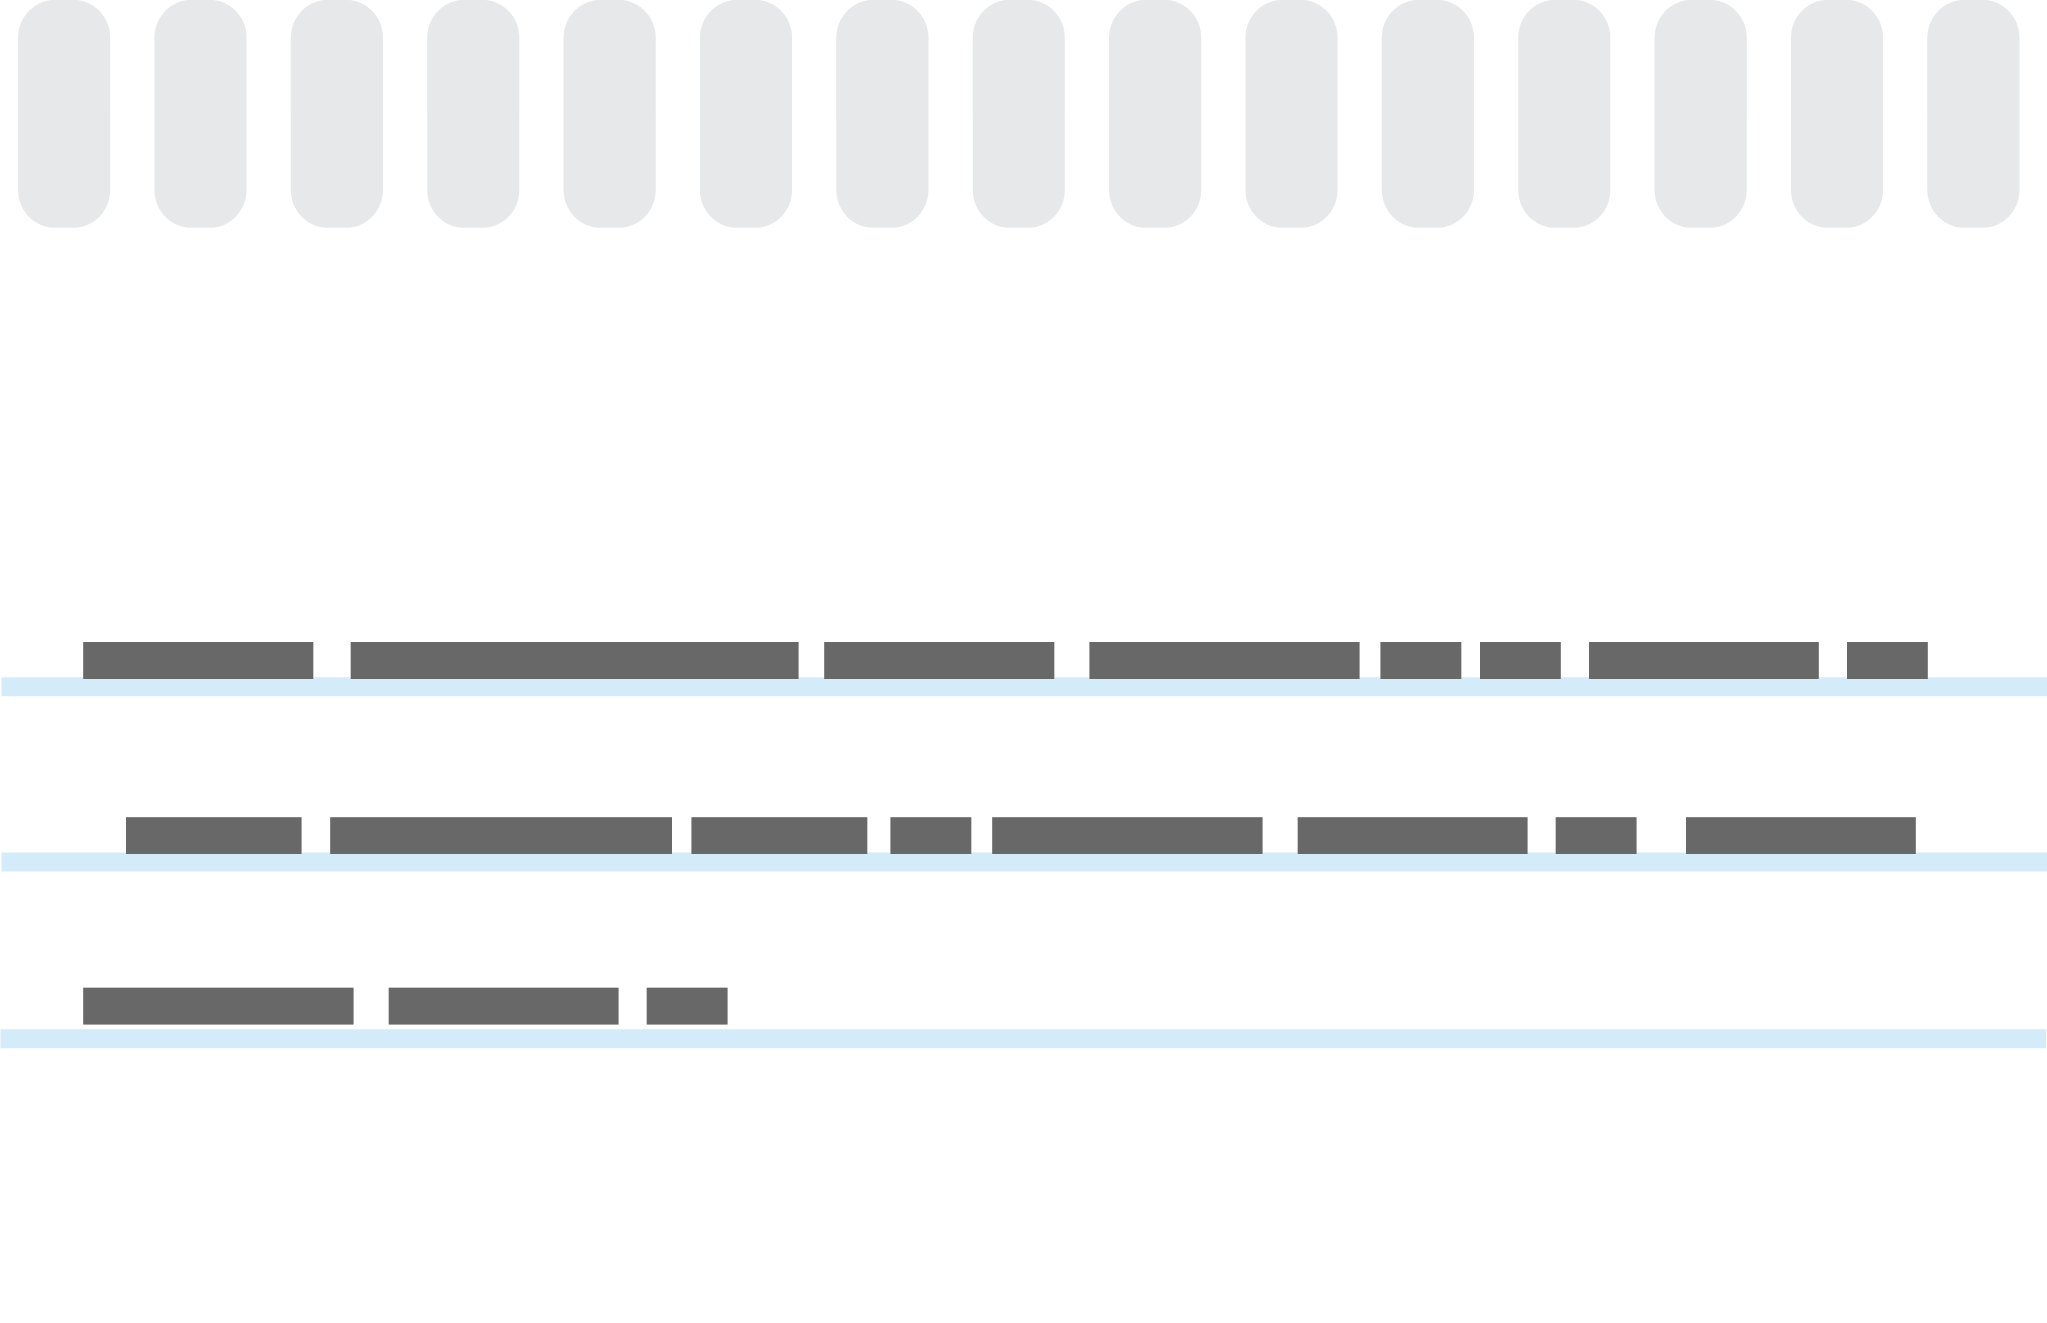 An illustration of a notebook